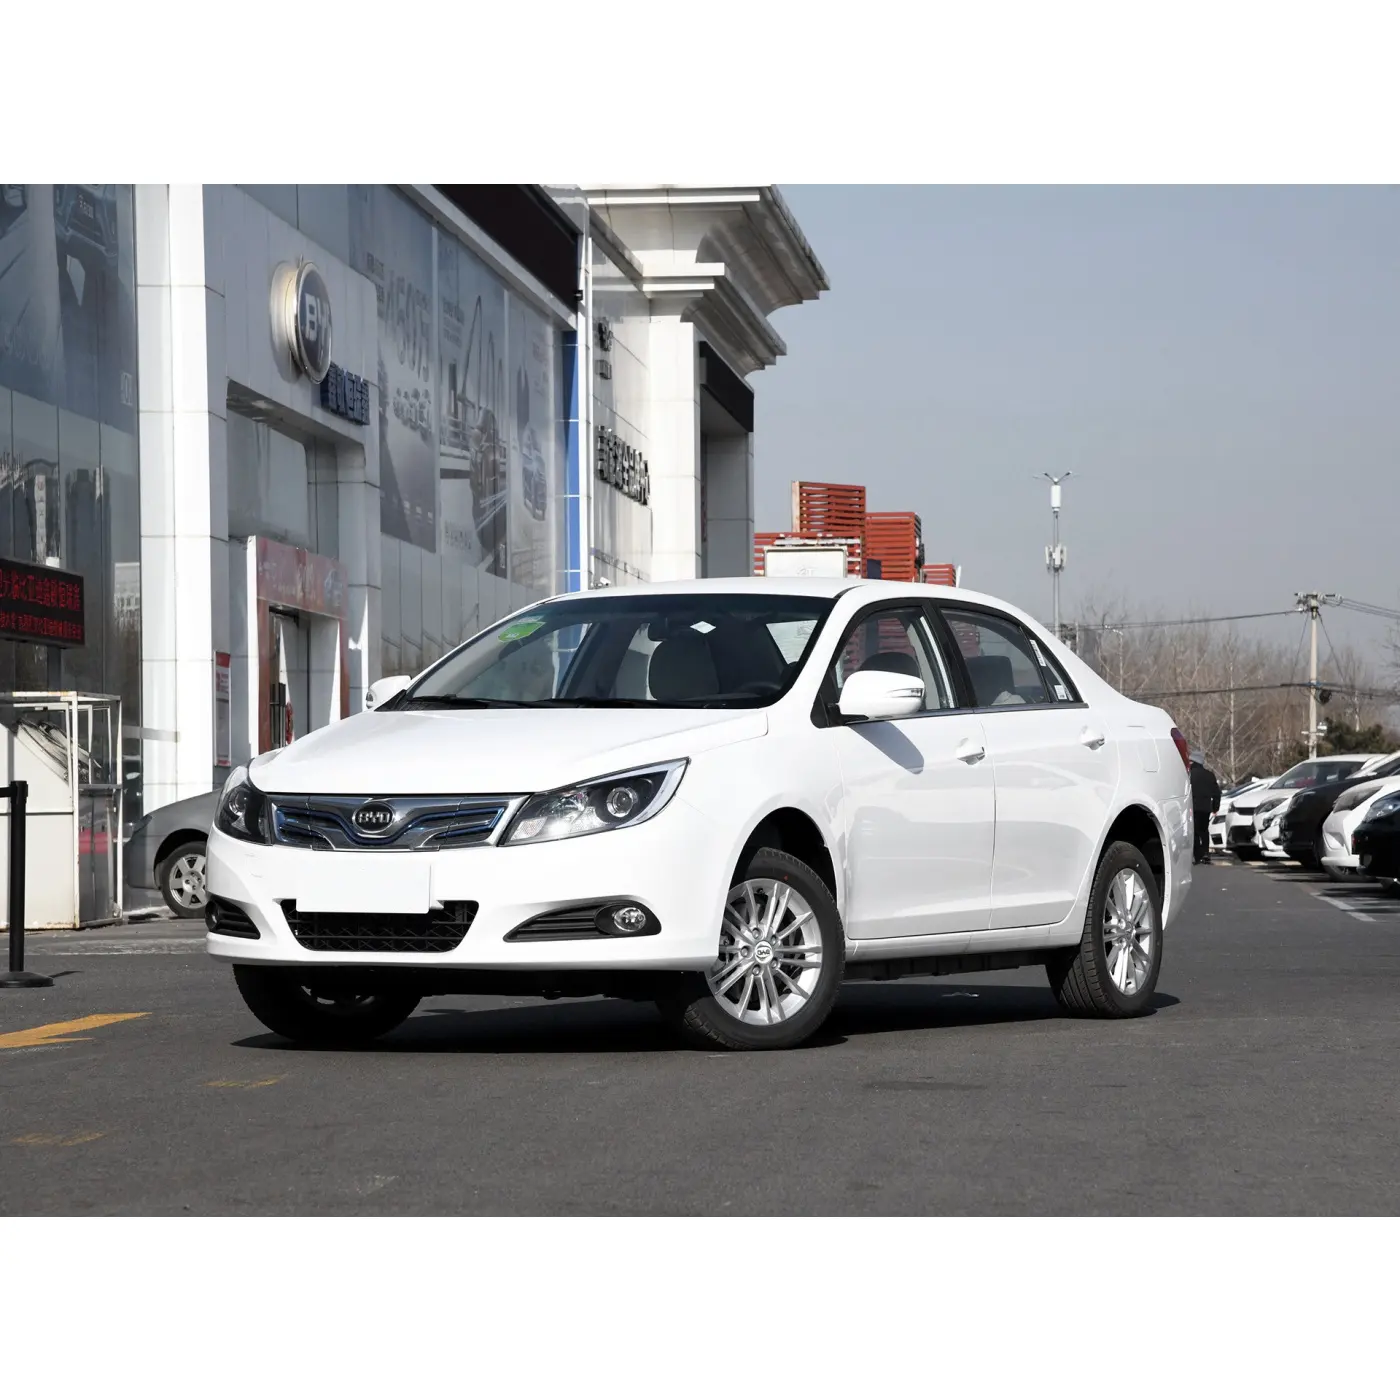 Cheap Second Hand EV Vehicle High Quality BYD E5 Used Electric Car For Sale Used Car For Sale